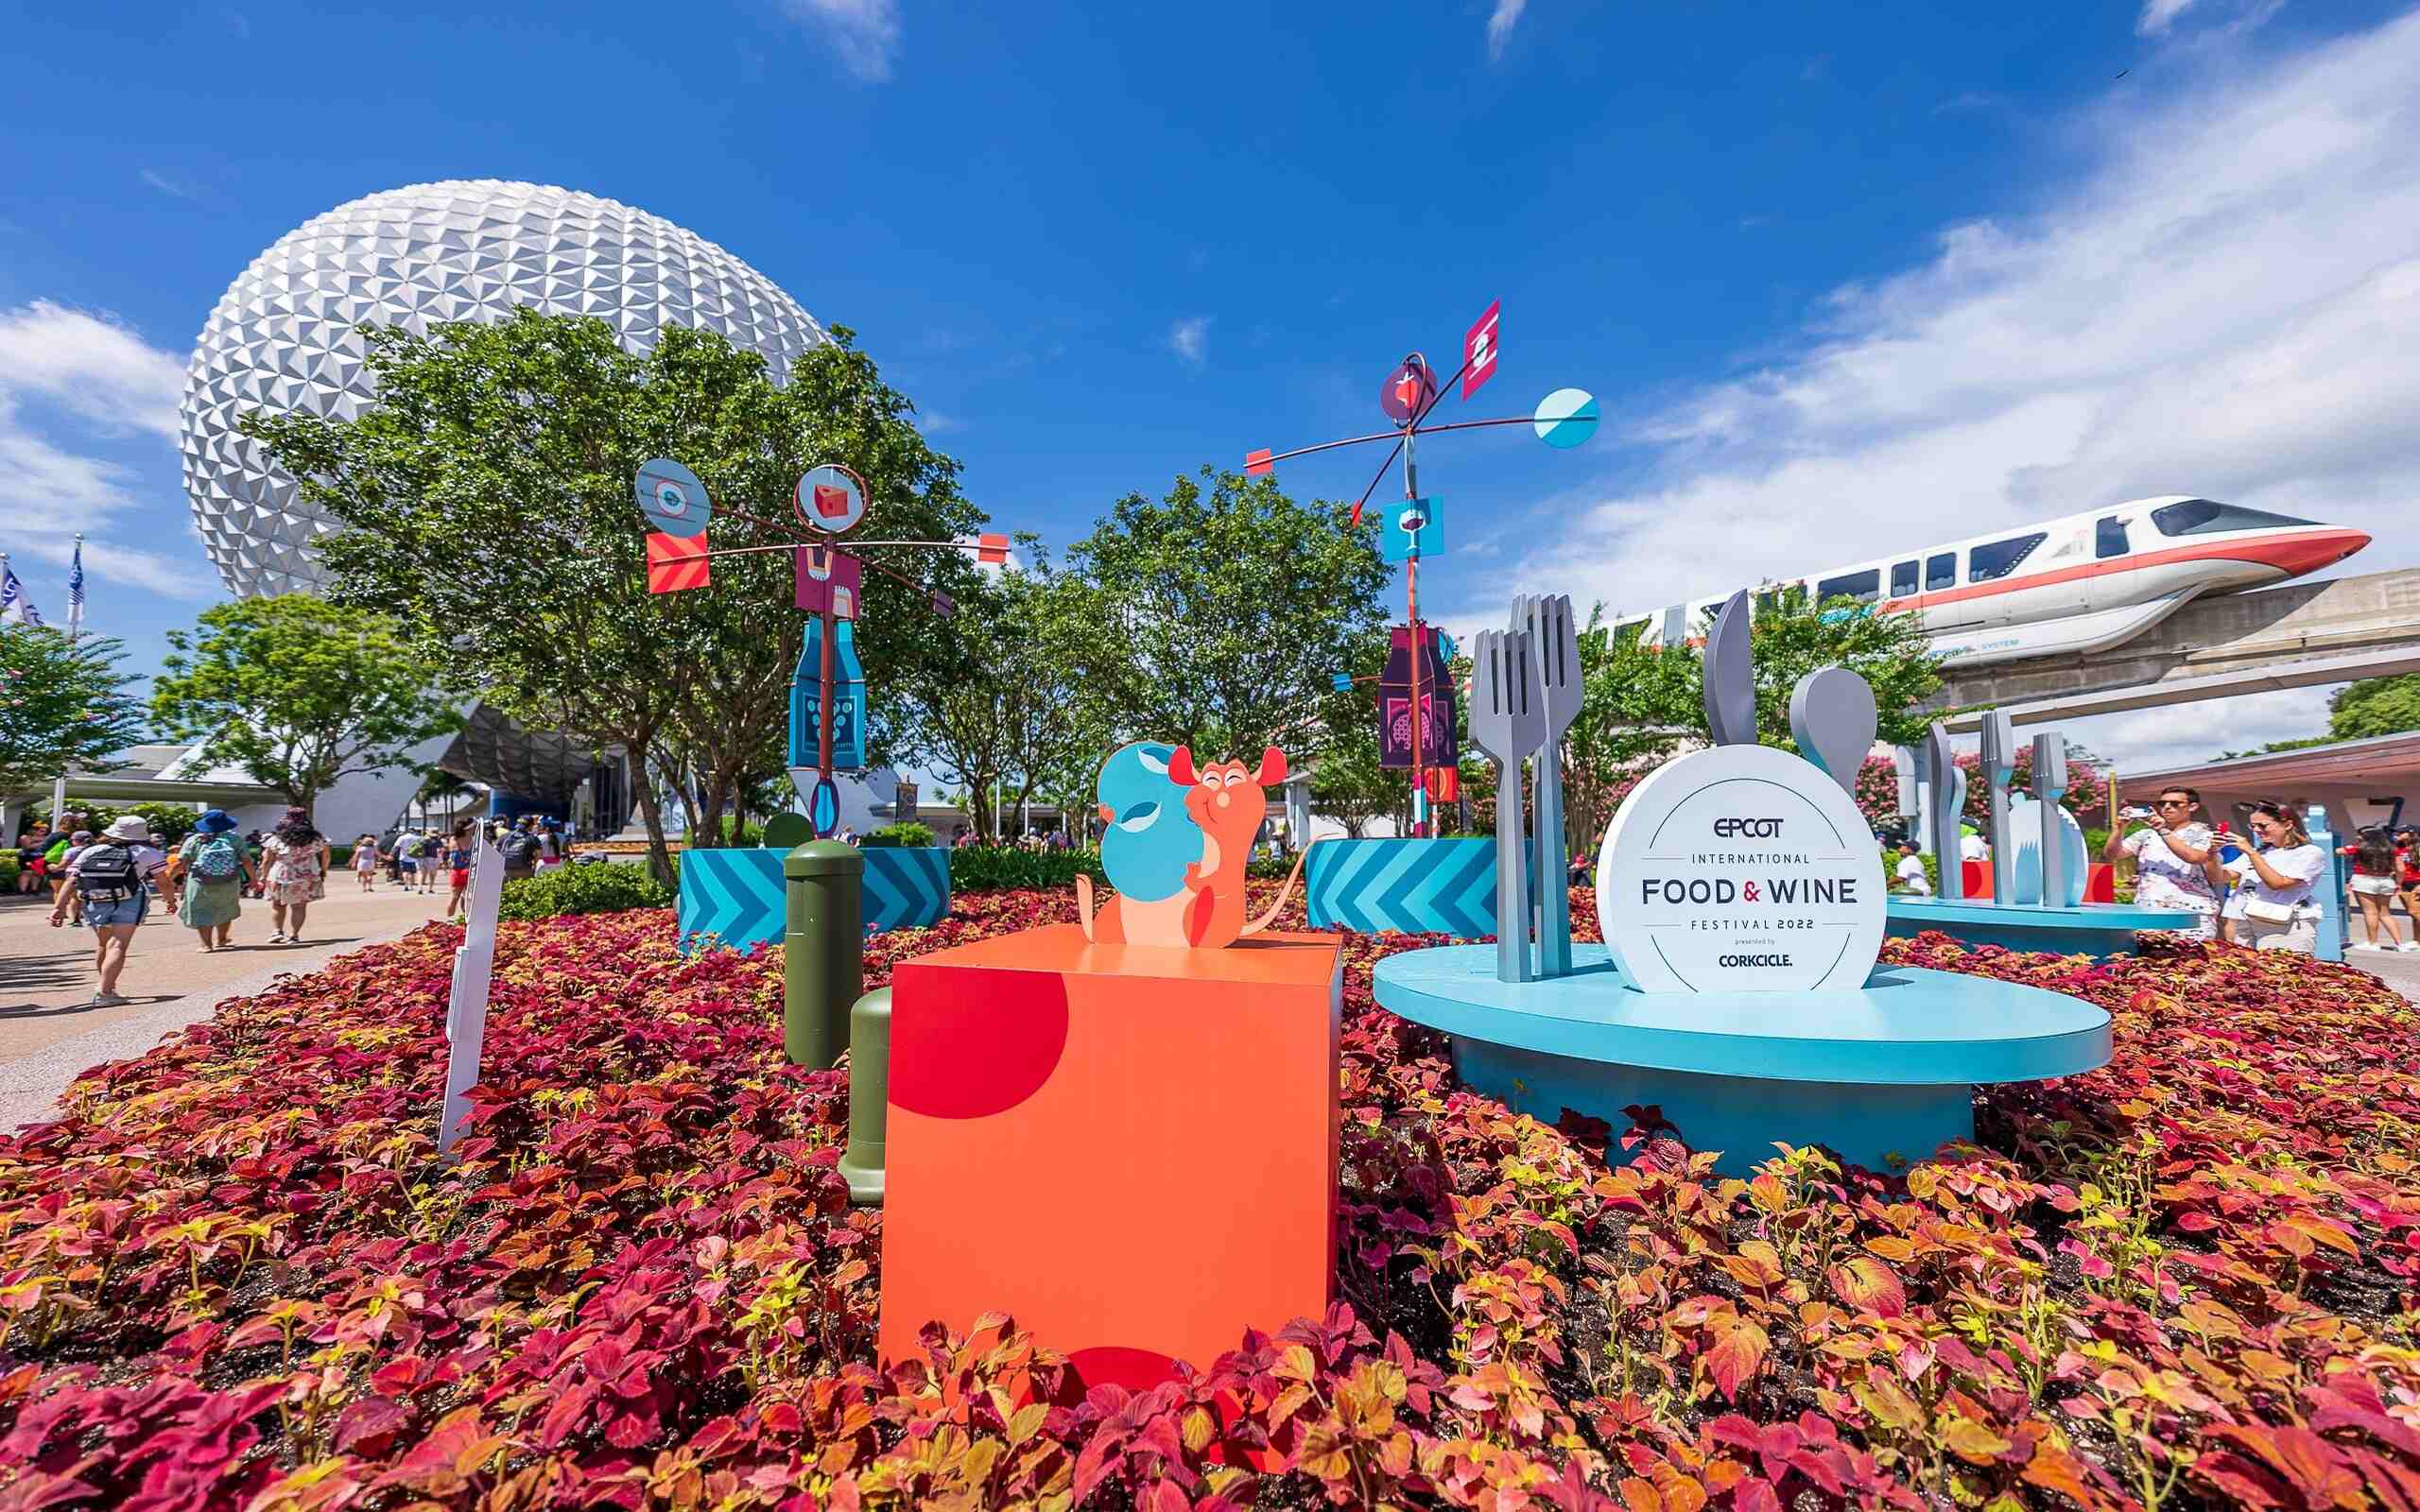 12 Facts About Epcot International Food & Wine Festival